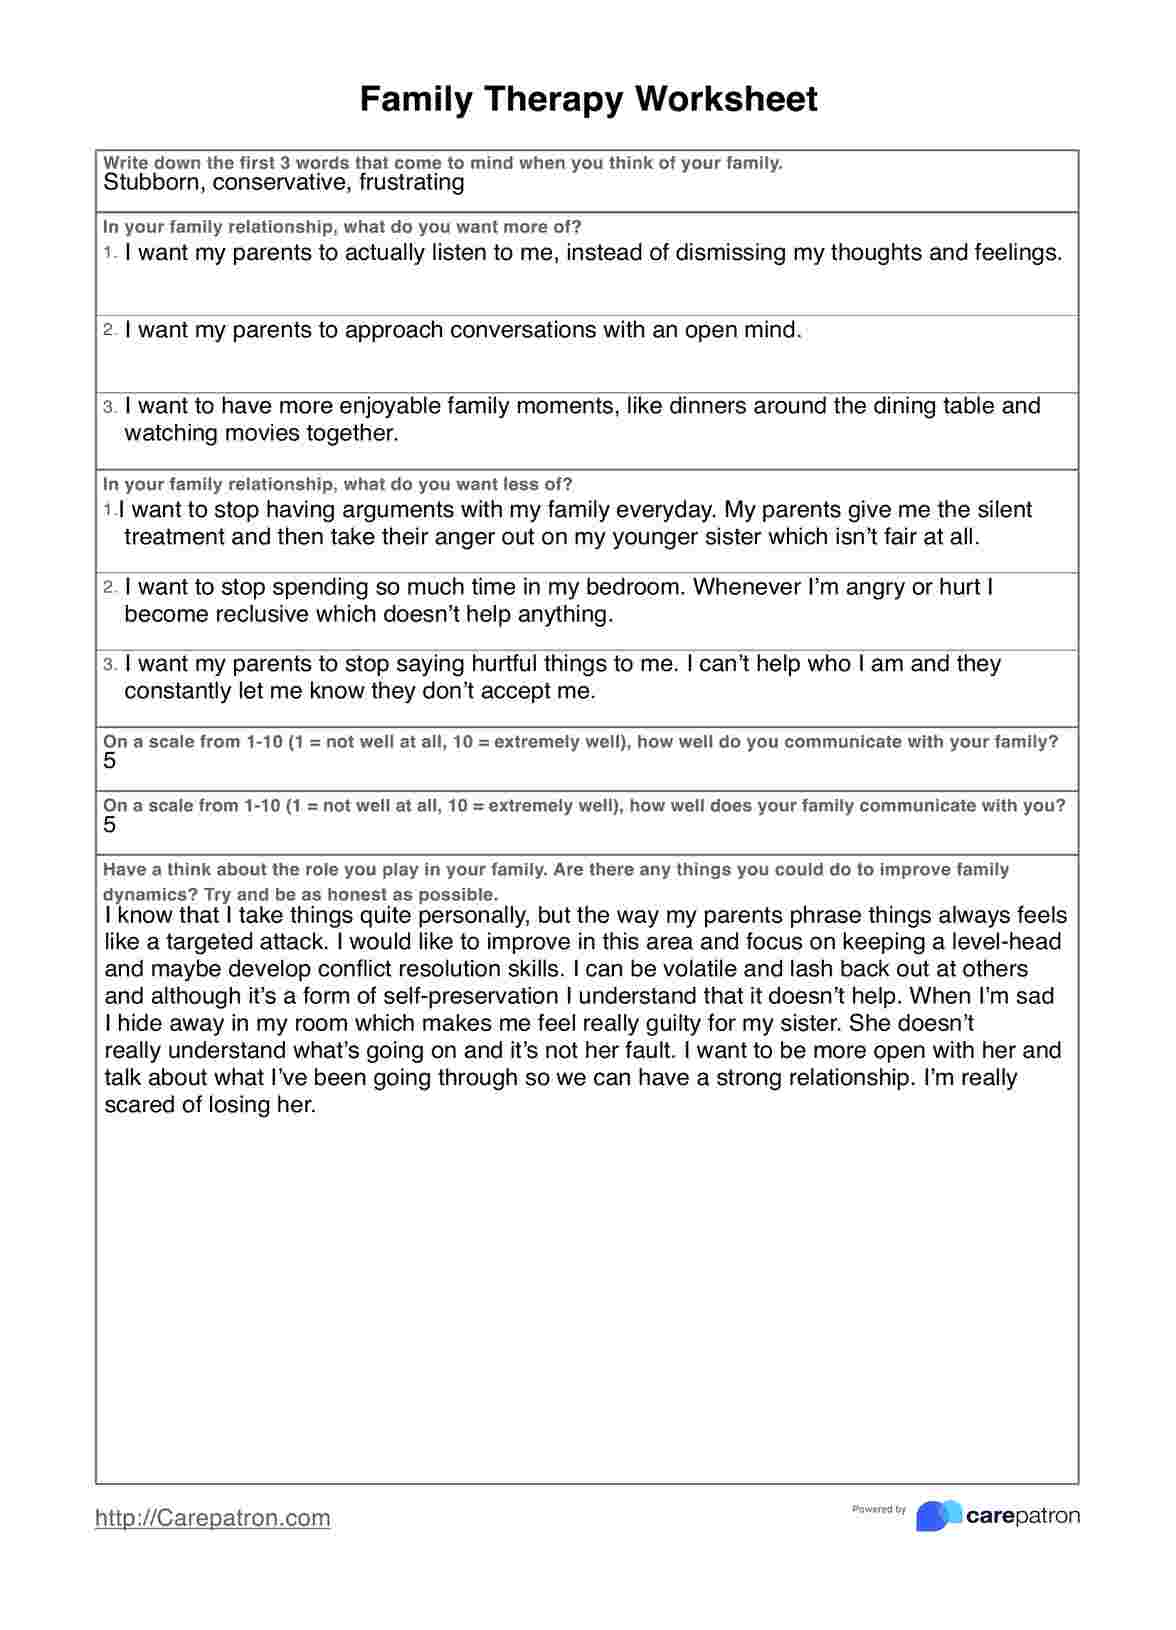 Family Therapy Worksheets PDF Example